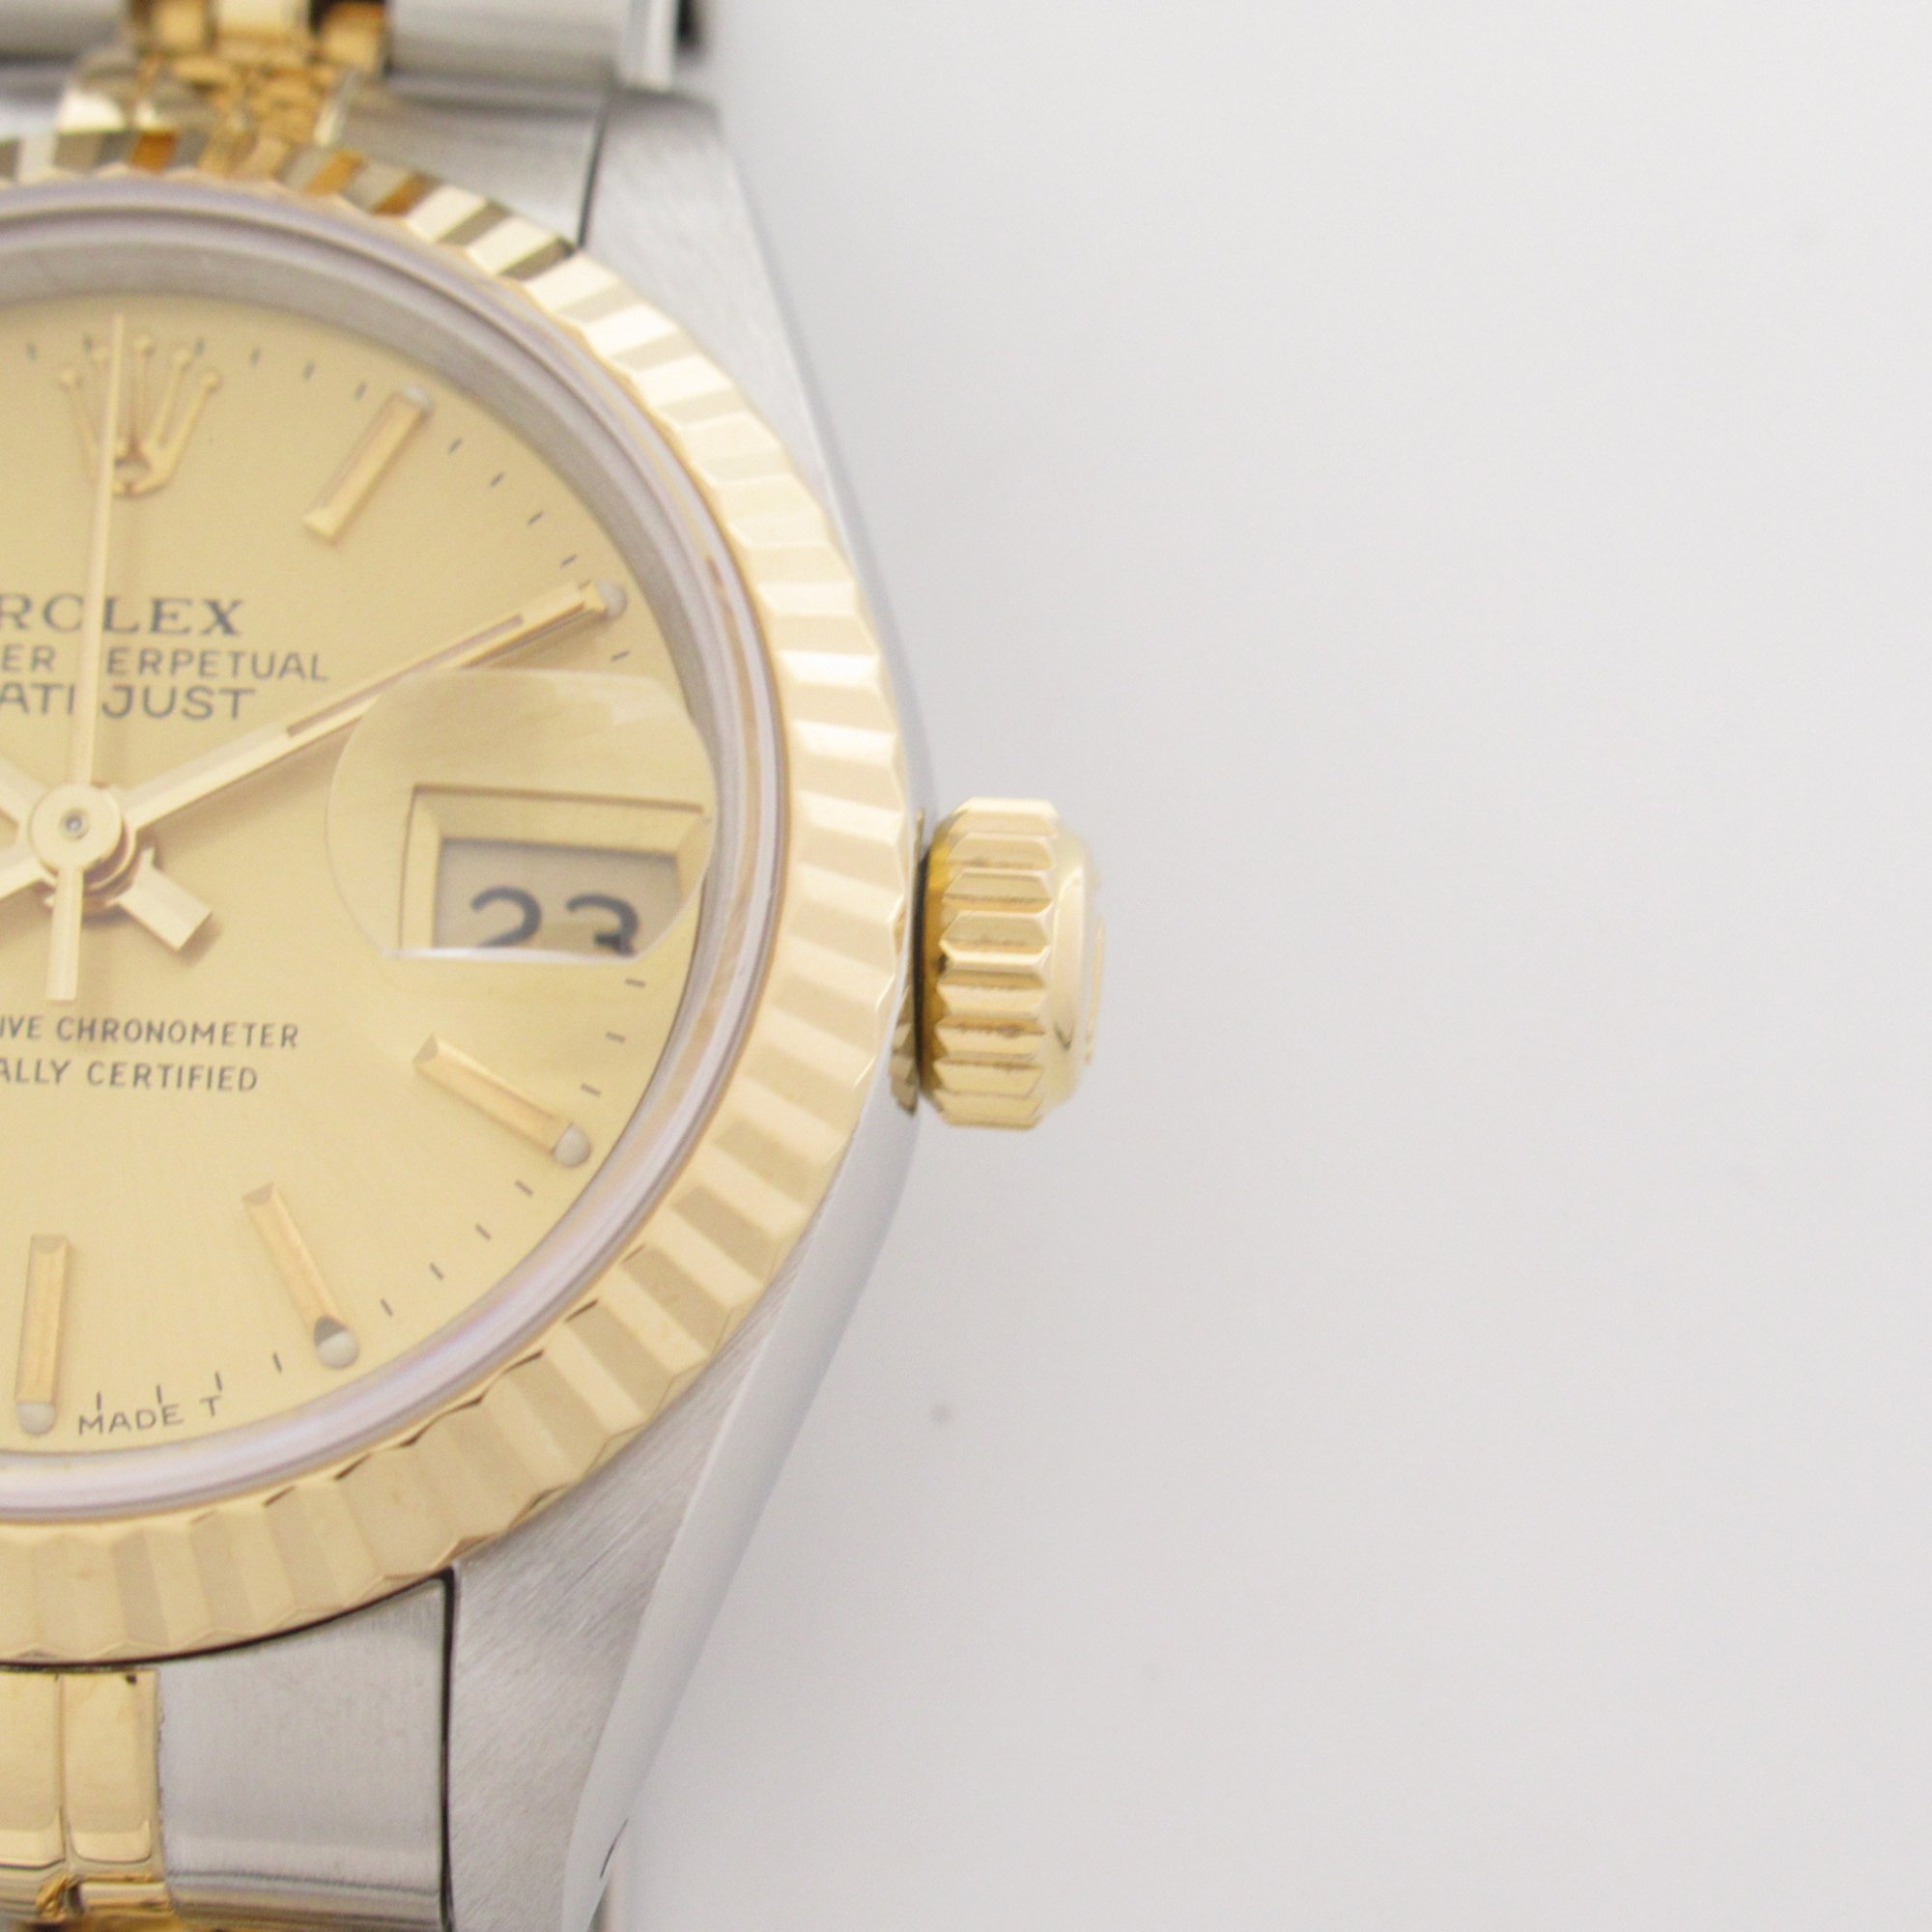 ROLEX Datejust N number Wrist Watch watch Wrist Watch 69173 Mechanical Automatic Gold  K18 (Yellow Gold) Stainless St 69173